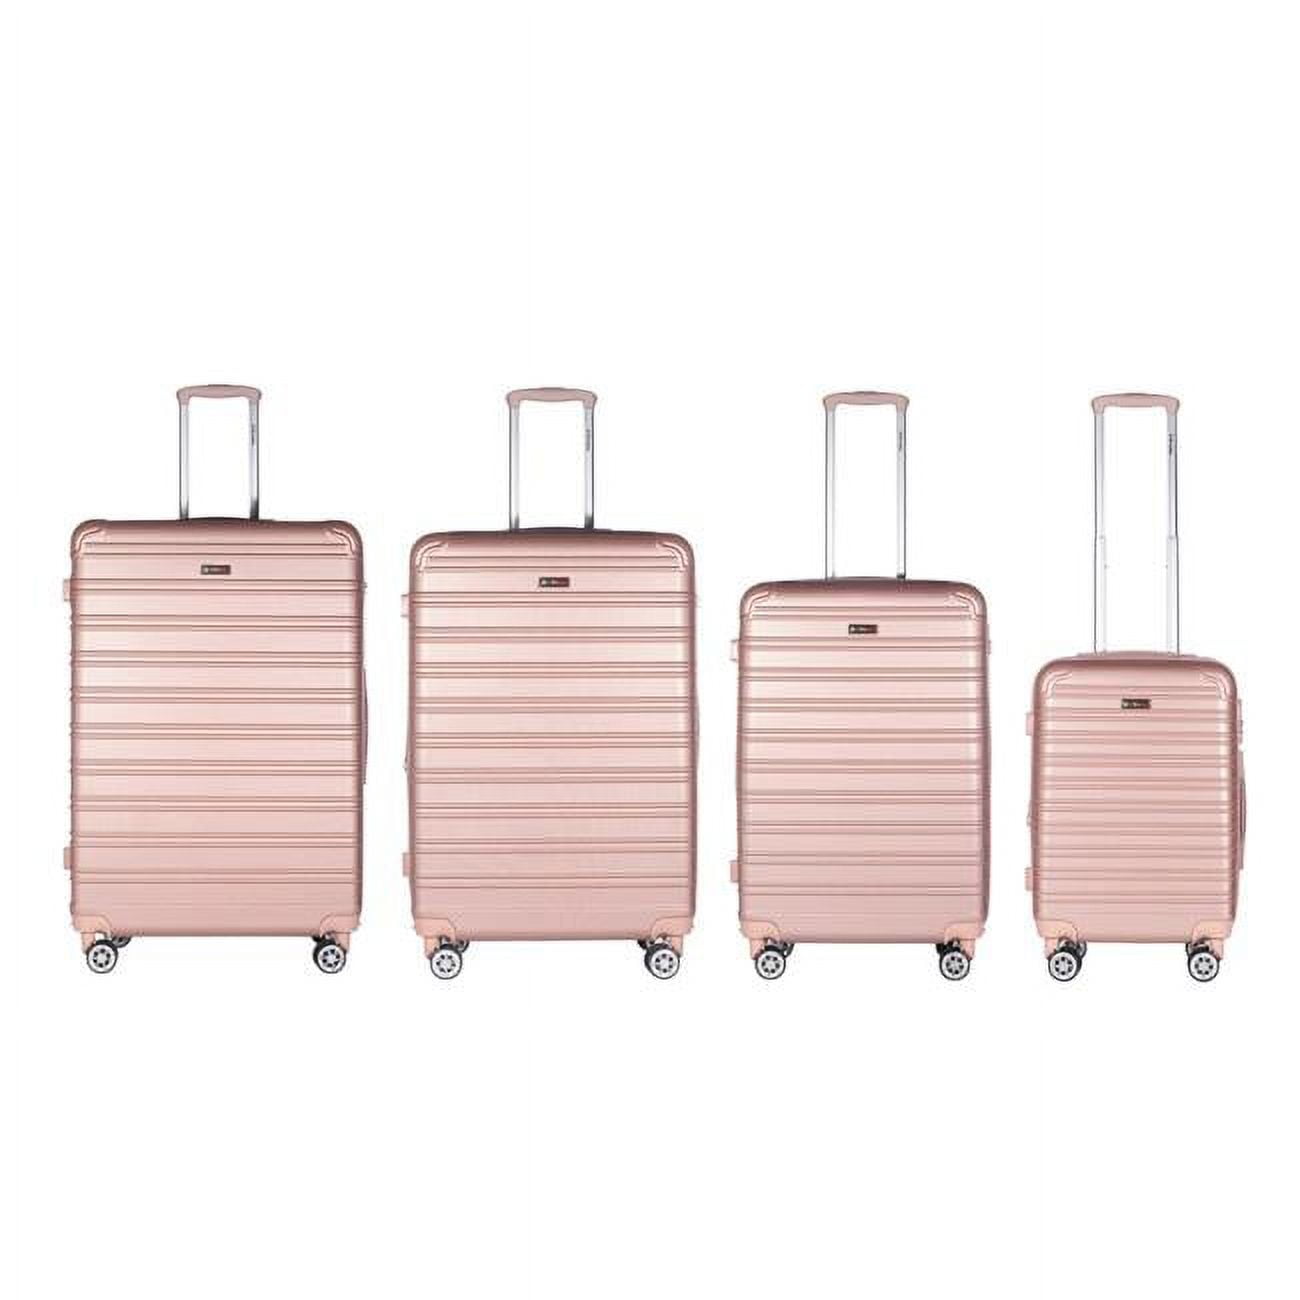 Picture of America&apos;s Travel Merchandise KING-RG-0573 King Collection 4pc Rose Gold Luggage Set(20/26/28/30&apos;)